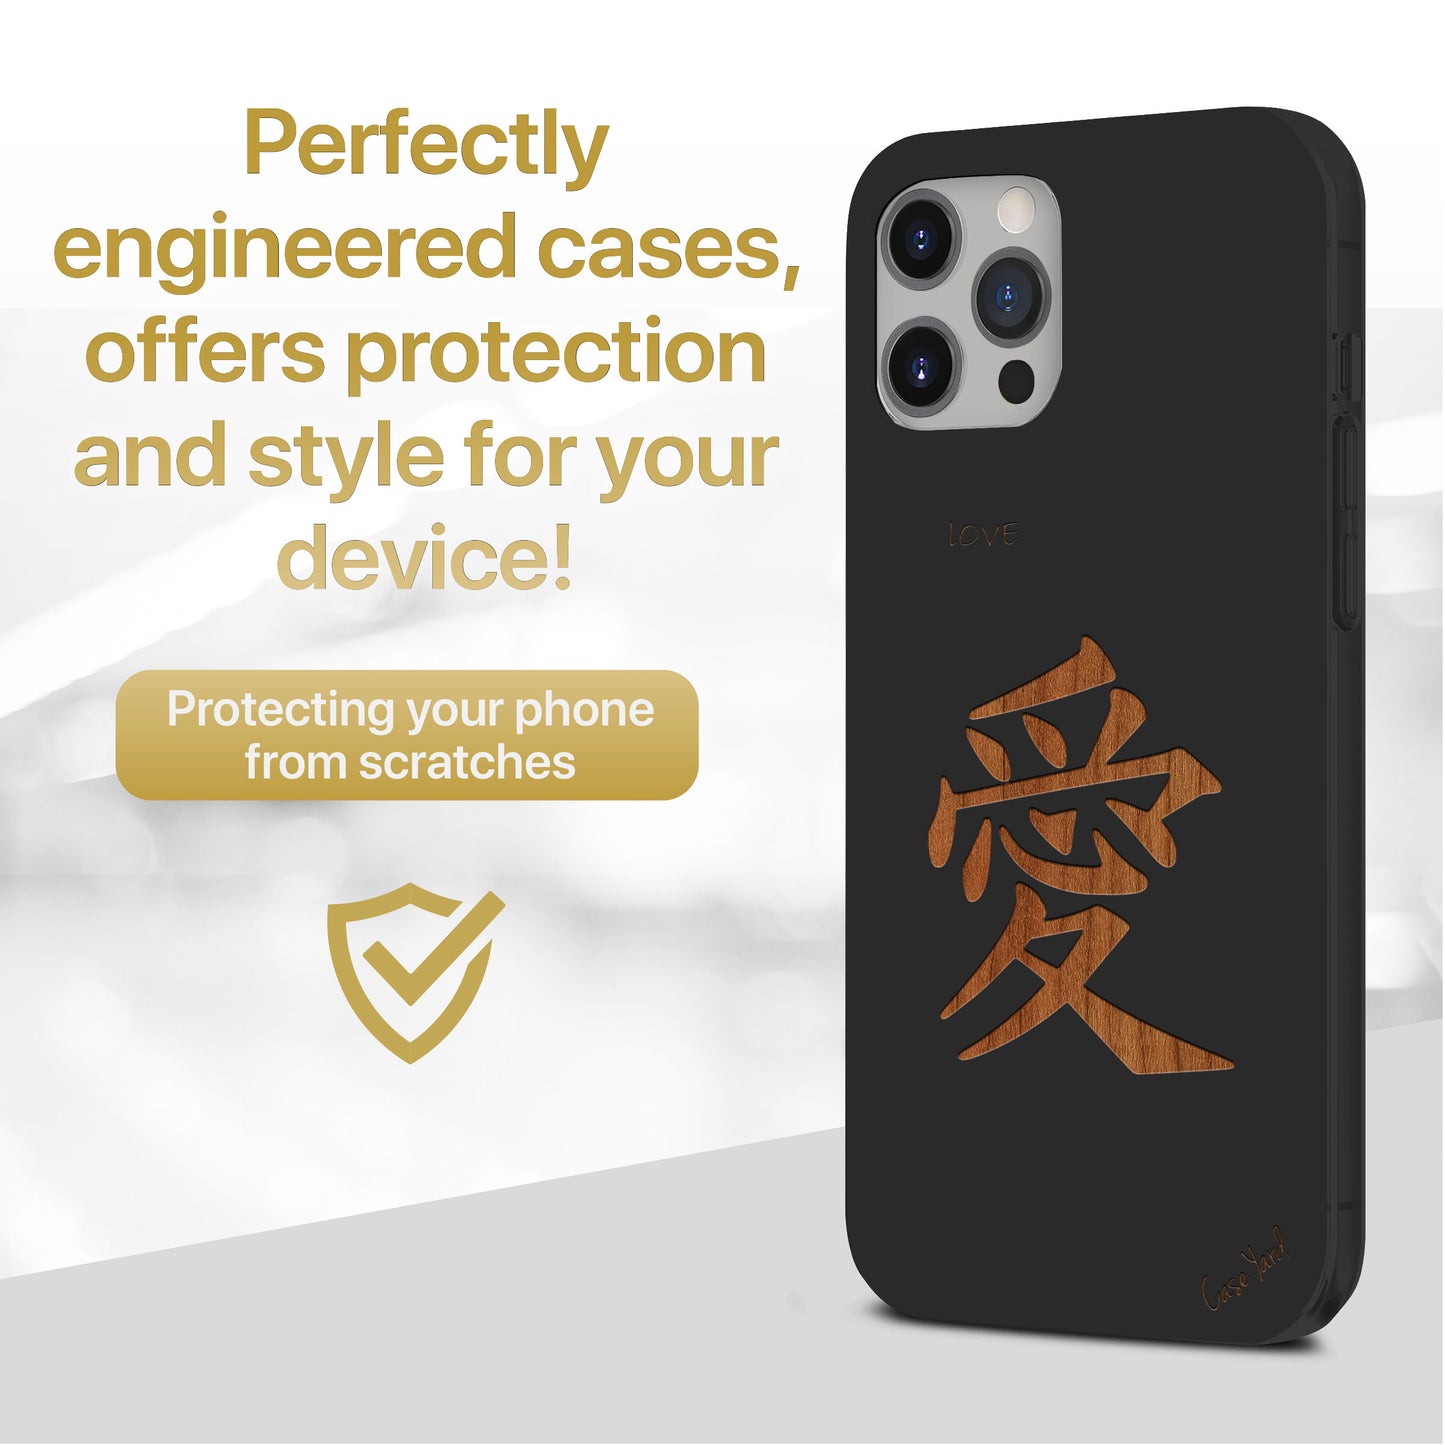 Wooden Cell Phone Case Cover, Laser Engraved case for iPhone & Samsung phone Japanese Love Design